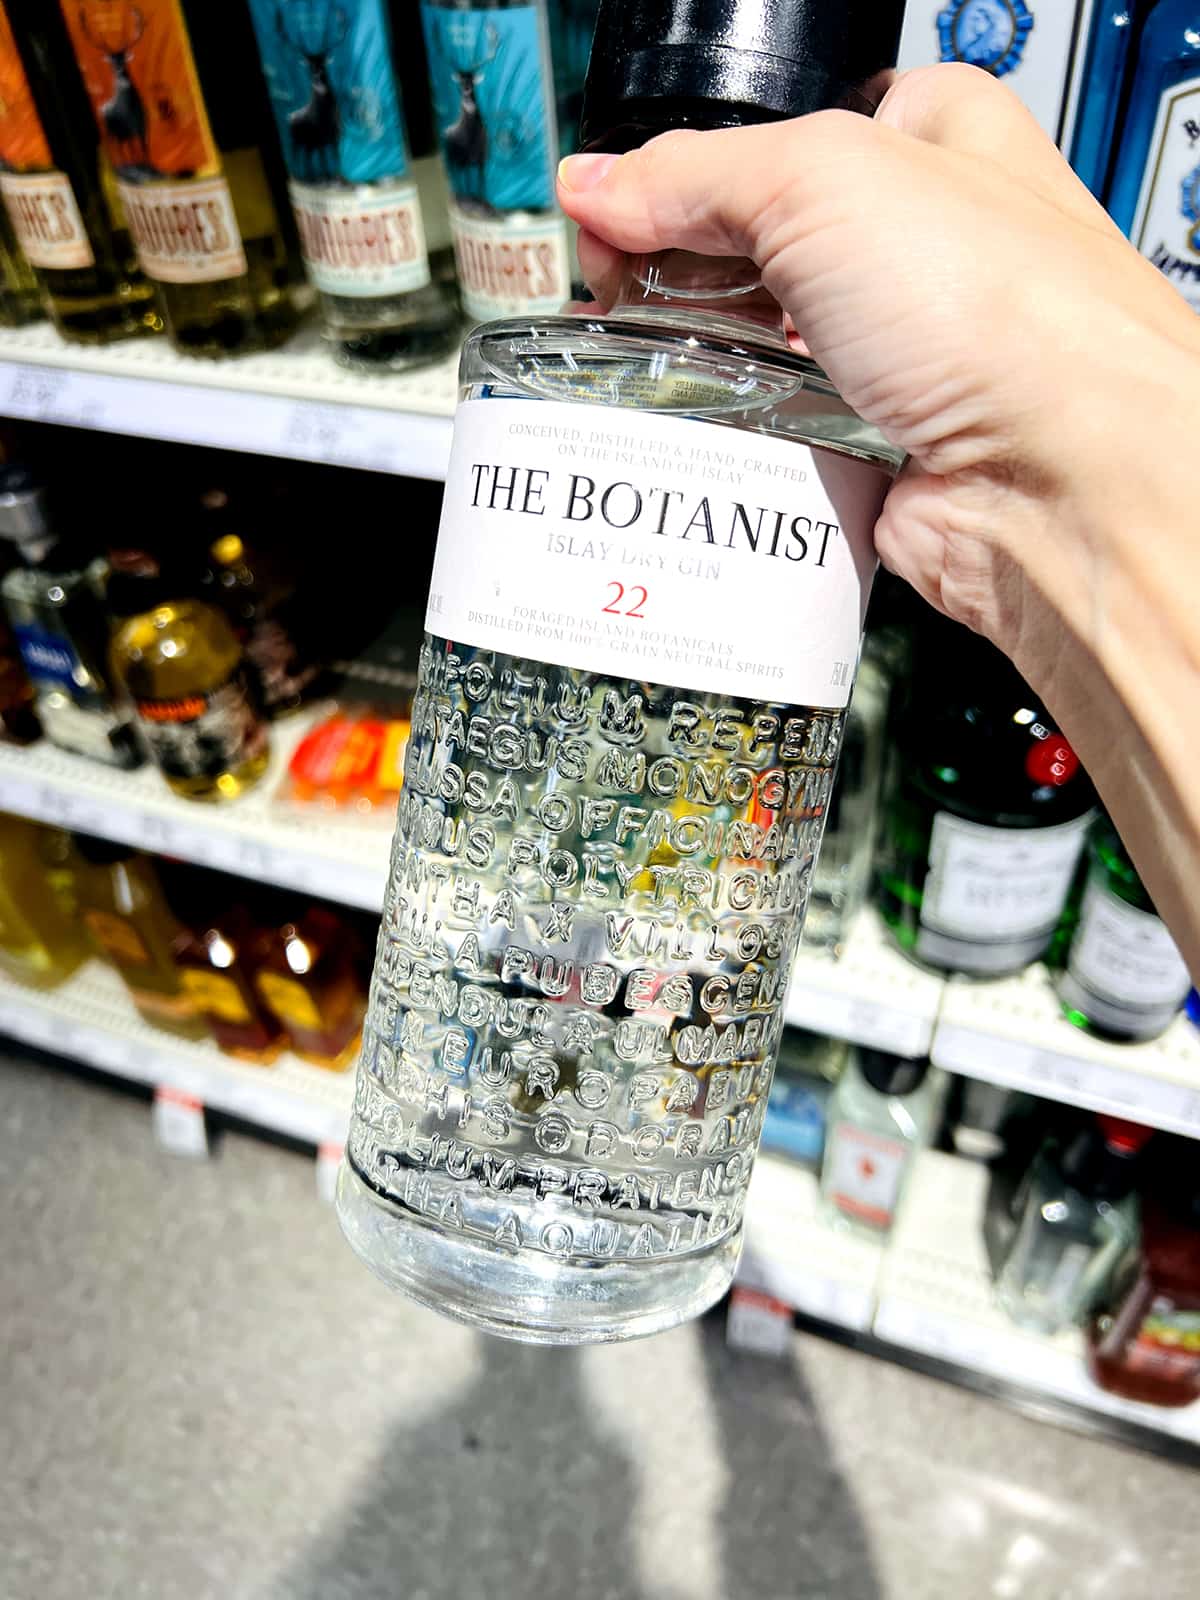 hand holding bottle of the botanist gin in grocery store aisle